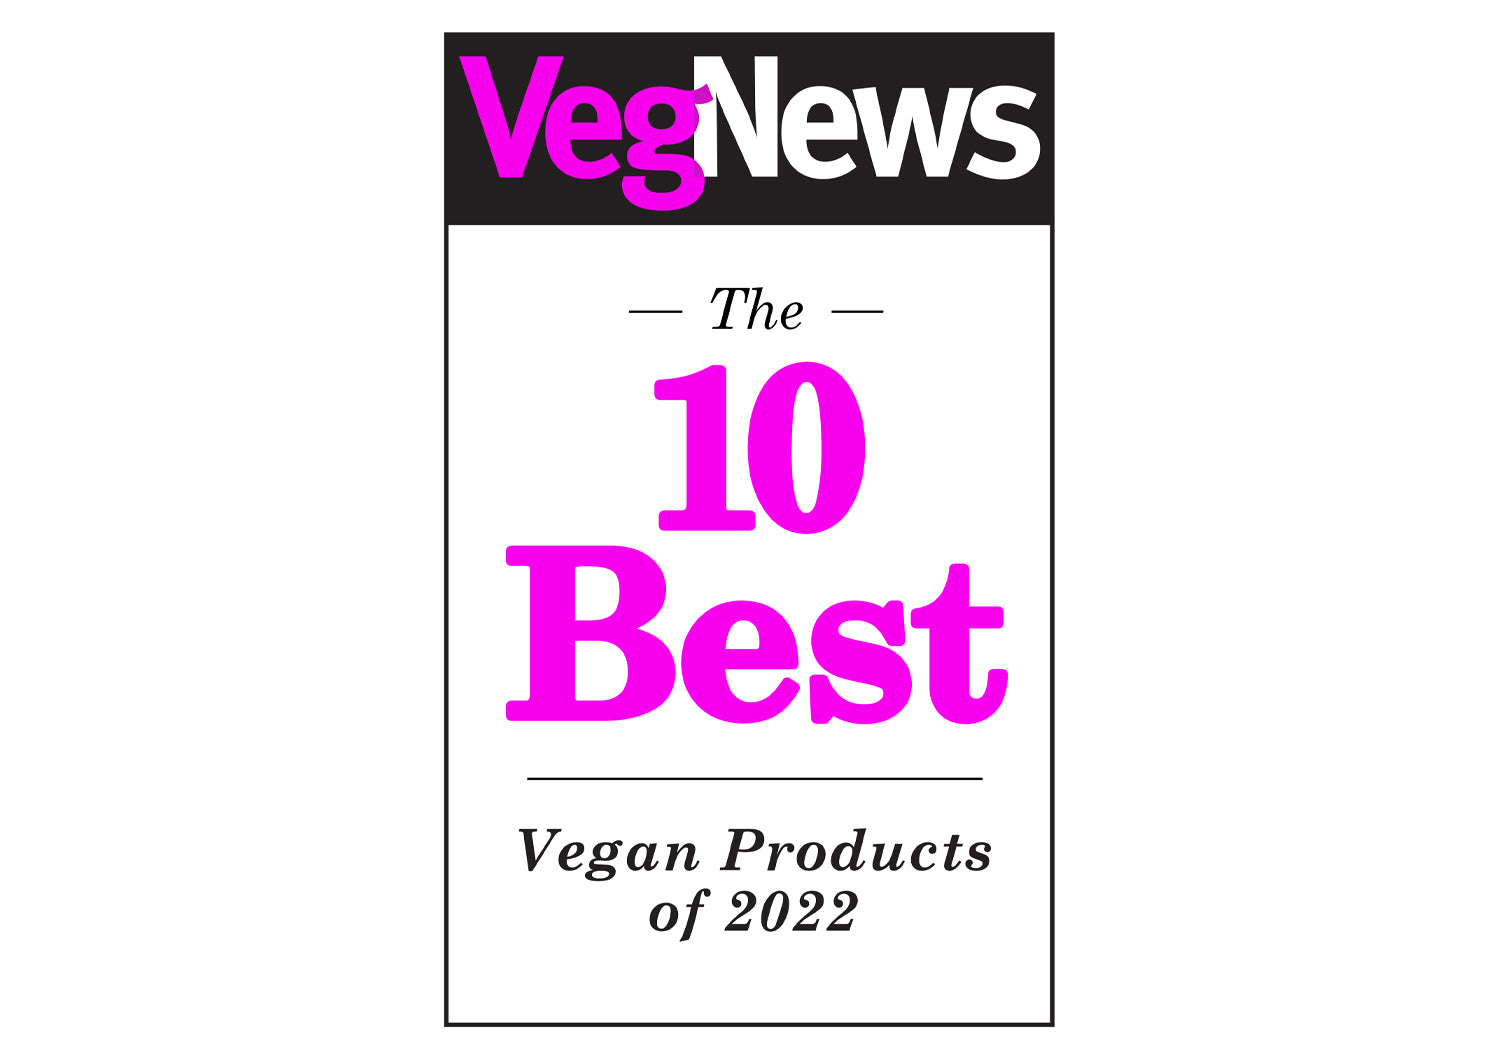 VOTED TOP 10 VEGAN PRODUCT